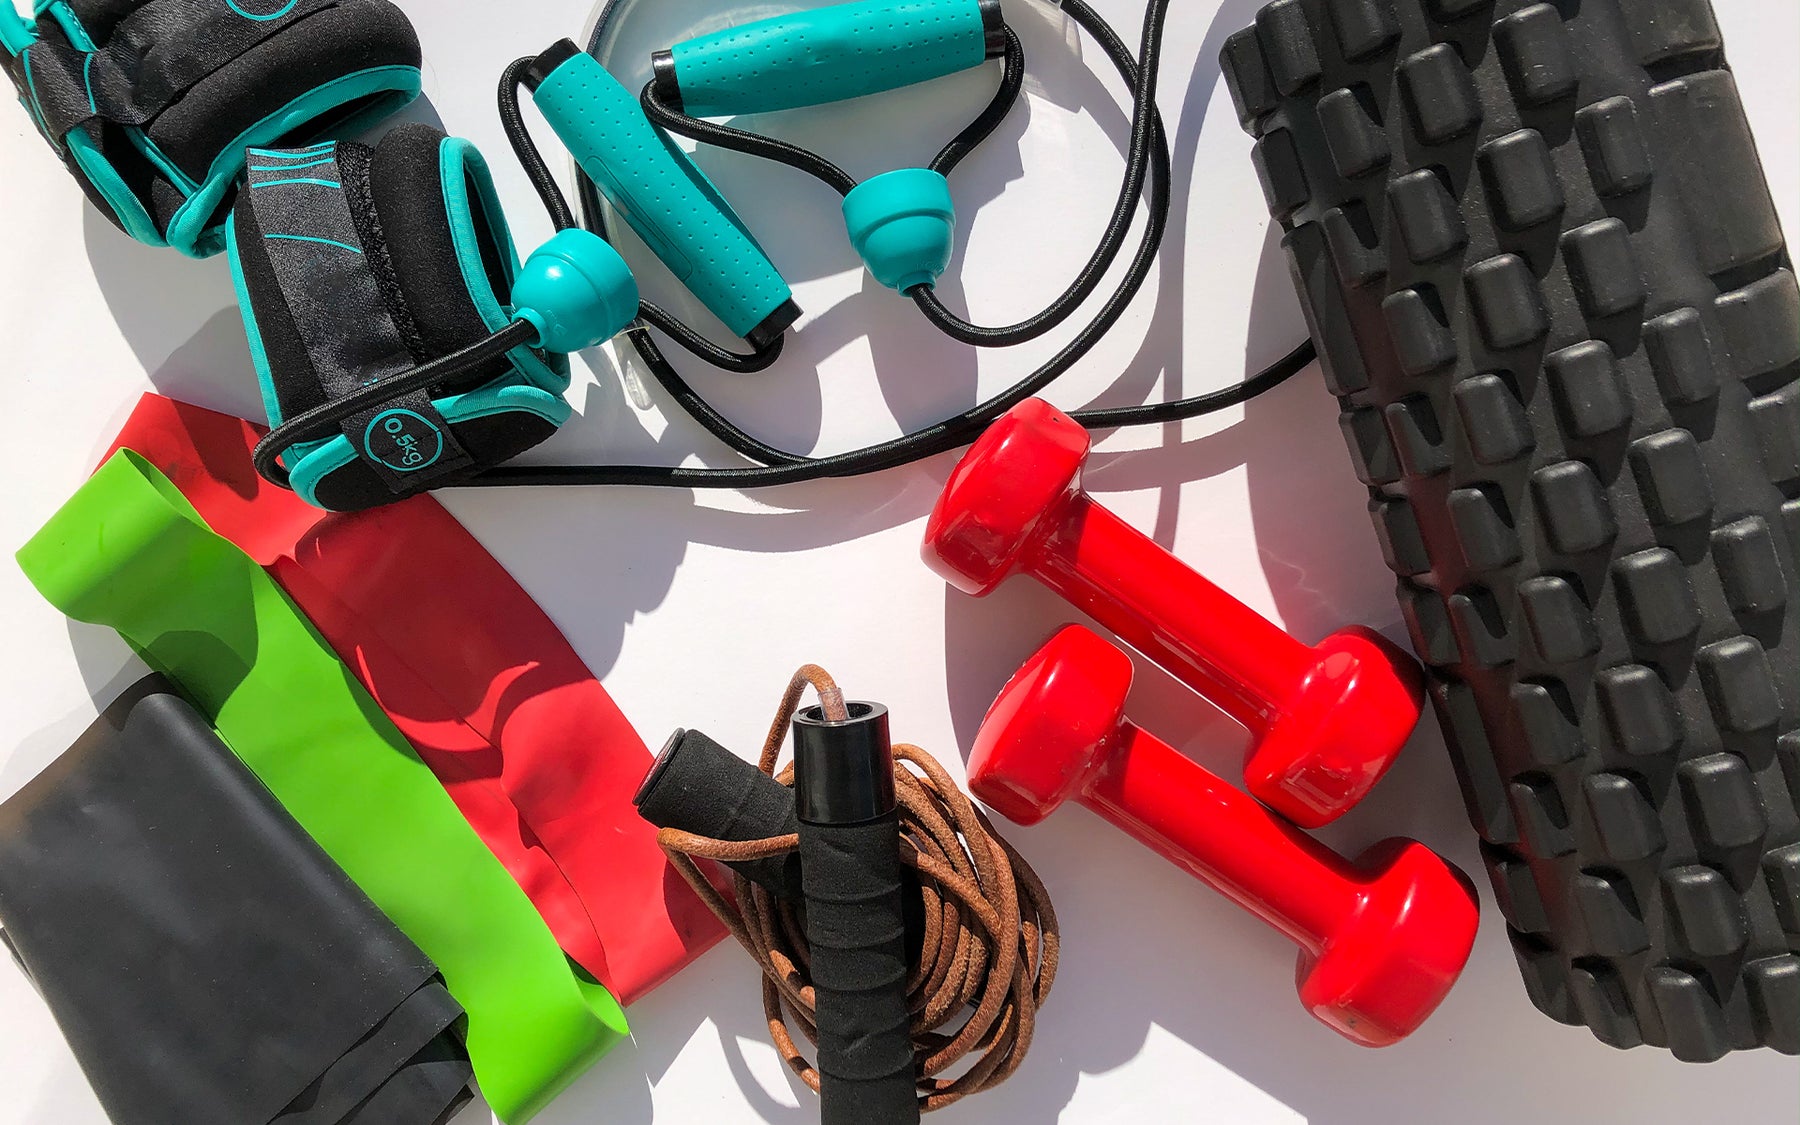 9 Workout Accessories That'll Improve Your Workout Flow